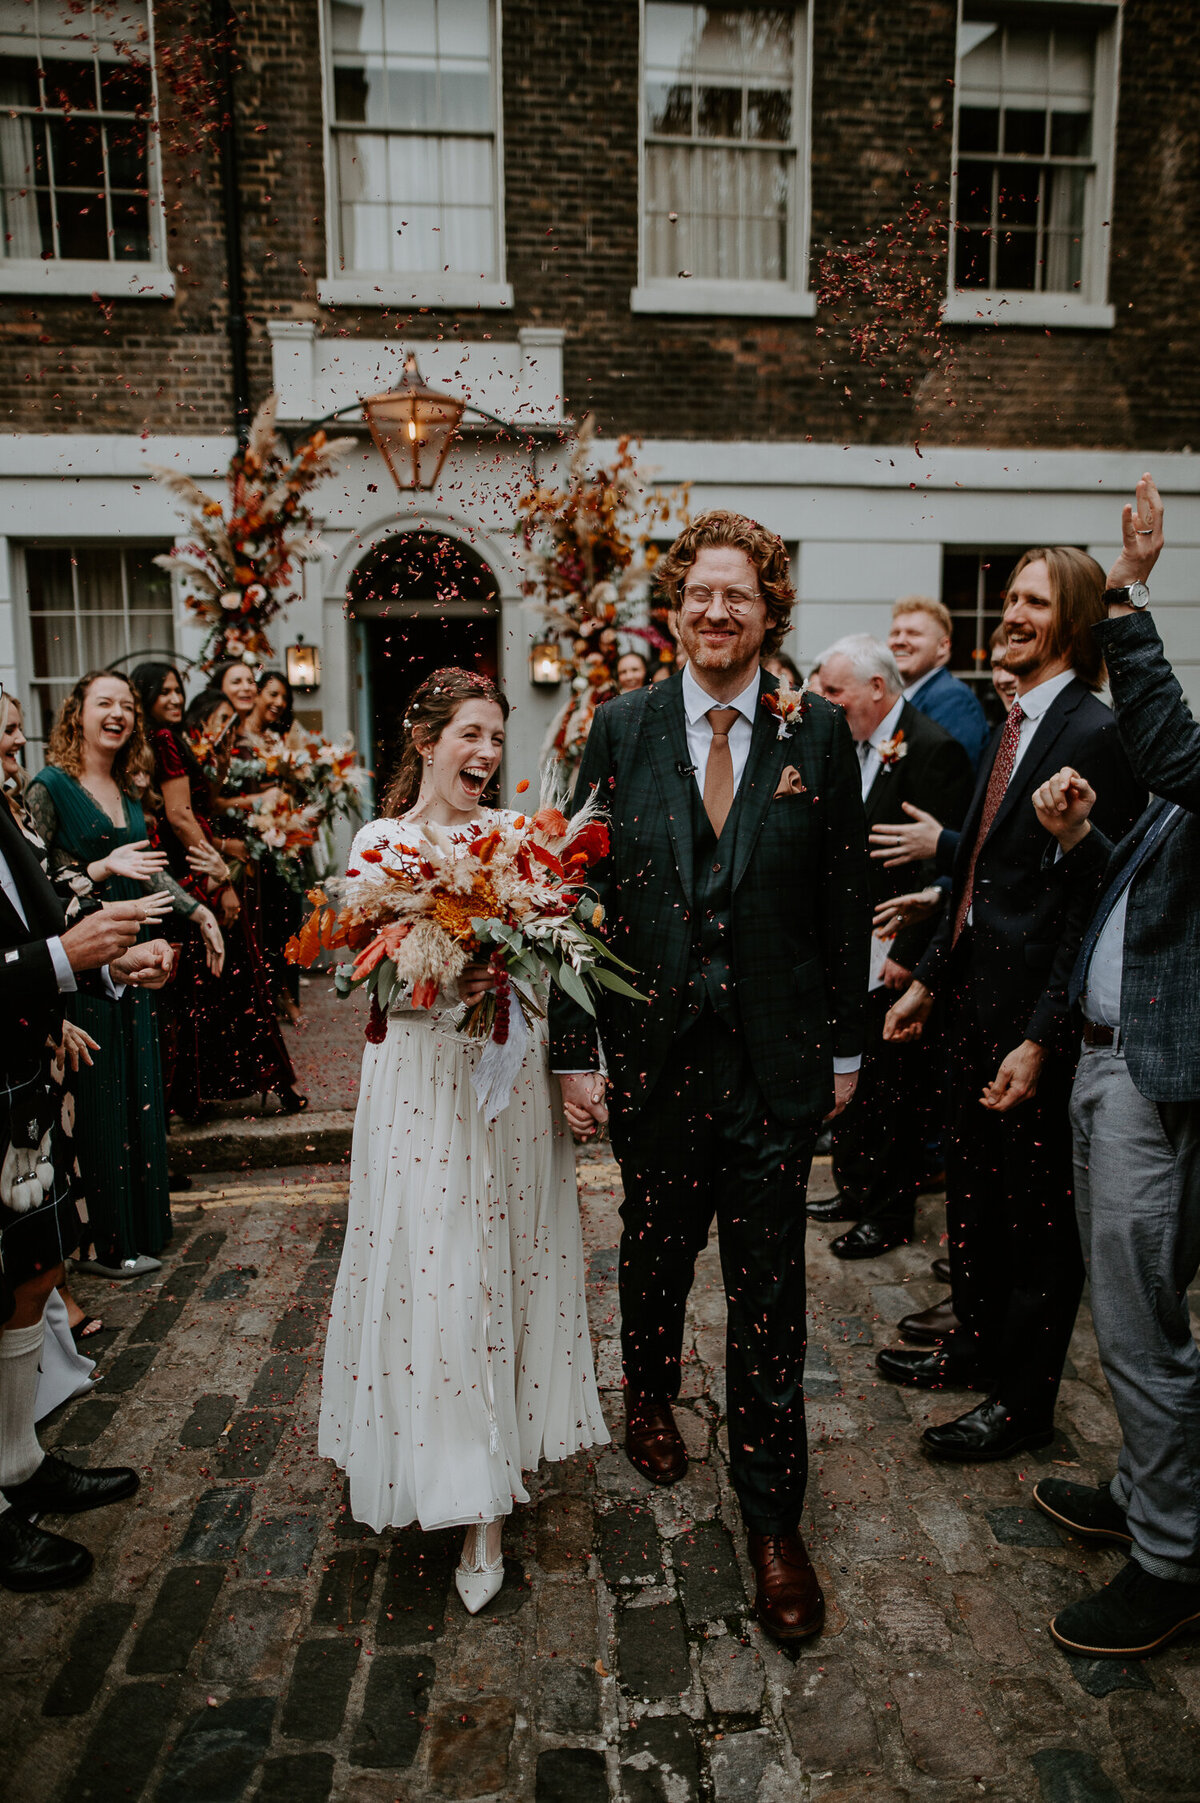 Married in the cool London location of The Zetter Townhouse in Islington Laura & Ian had an amazing Autumnal vibe wedding. Laura wearing her Mum’s dress was a great little addition to her day. The florals by the amazing @blooming_flair really set the tones for the wedding in regards to editing.